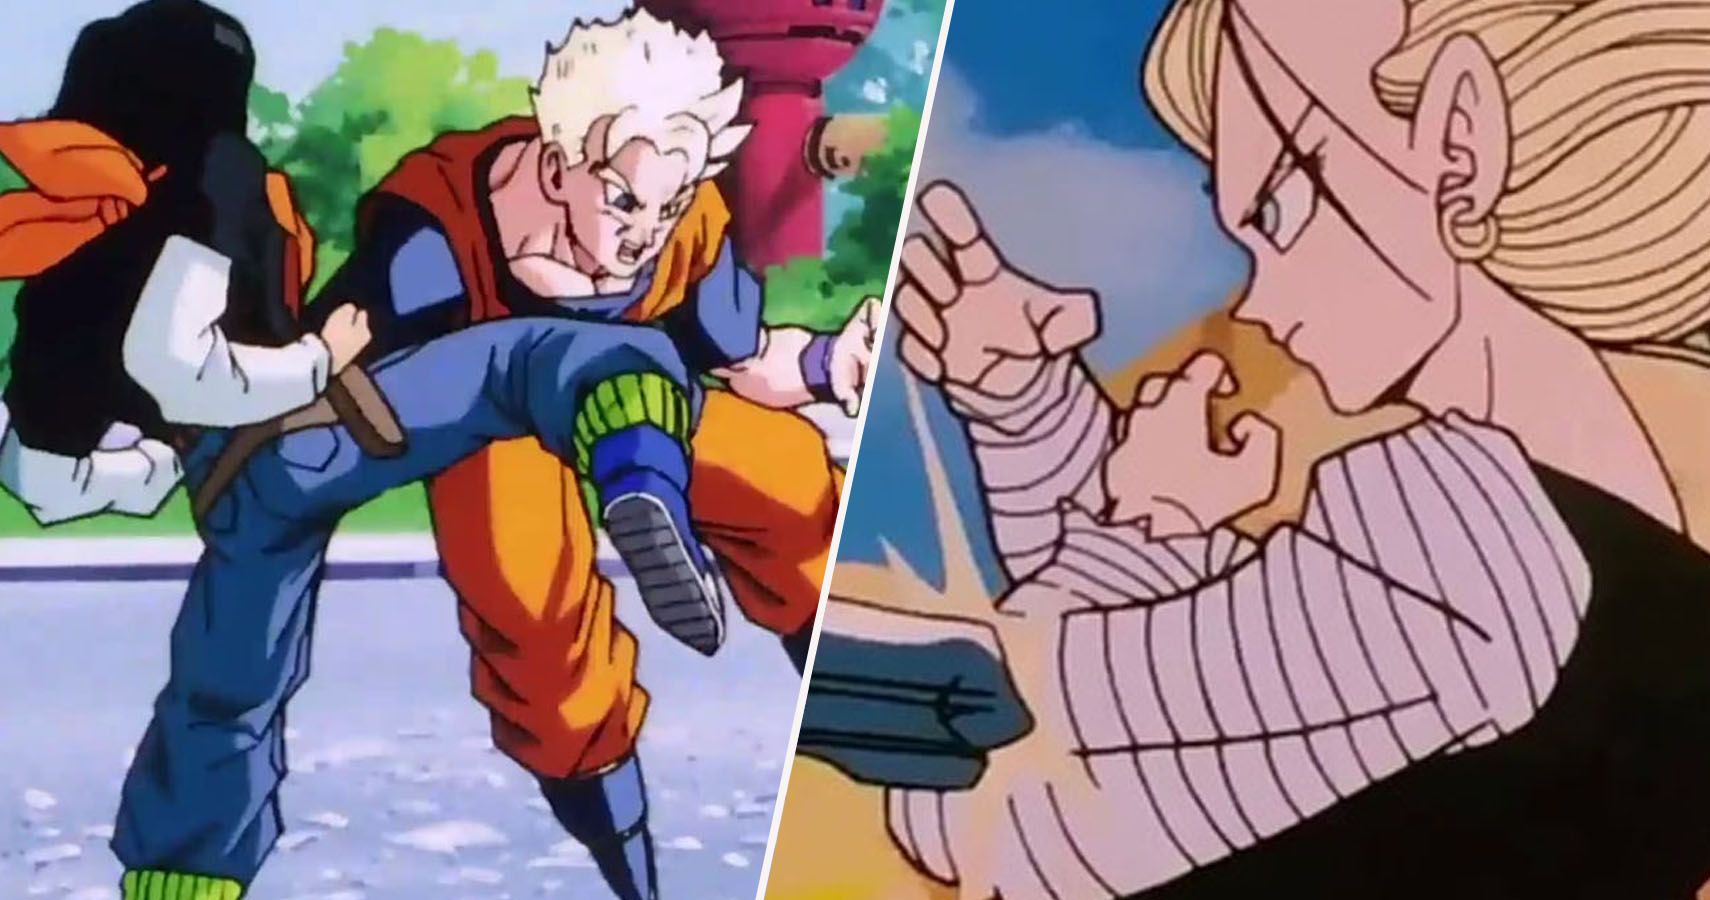 TOP 5 ANDROIDS In Dragon Ball Z 